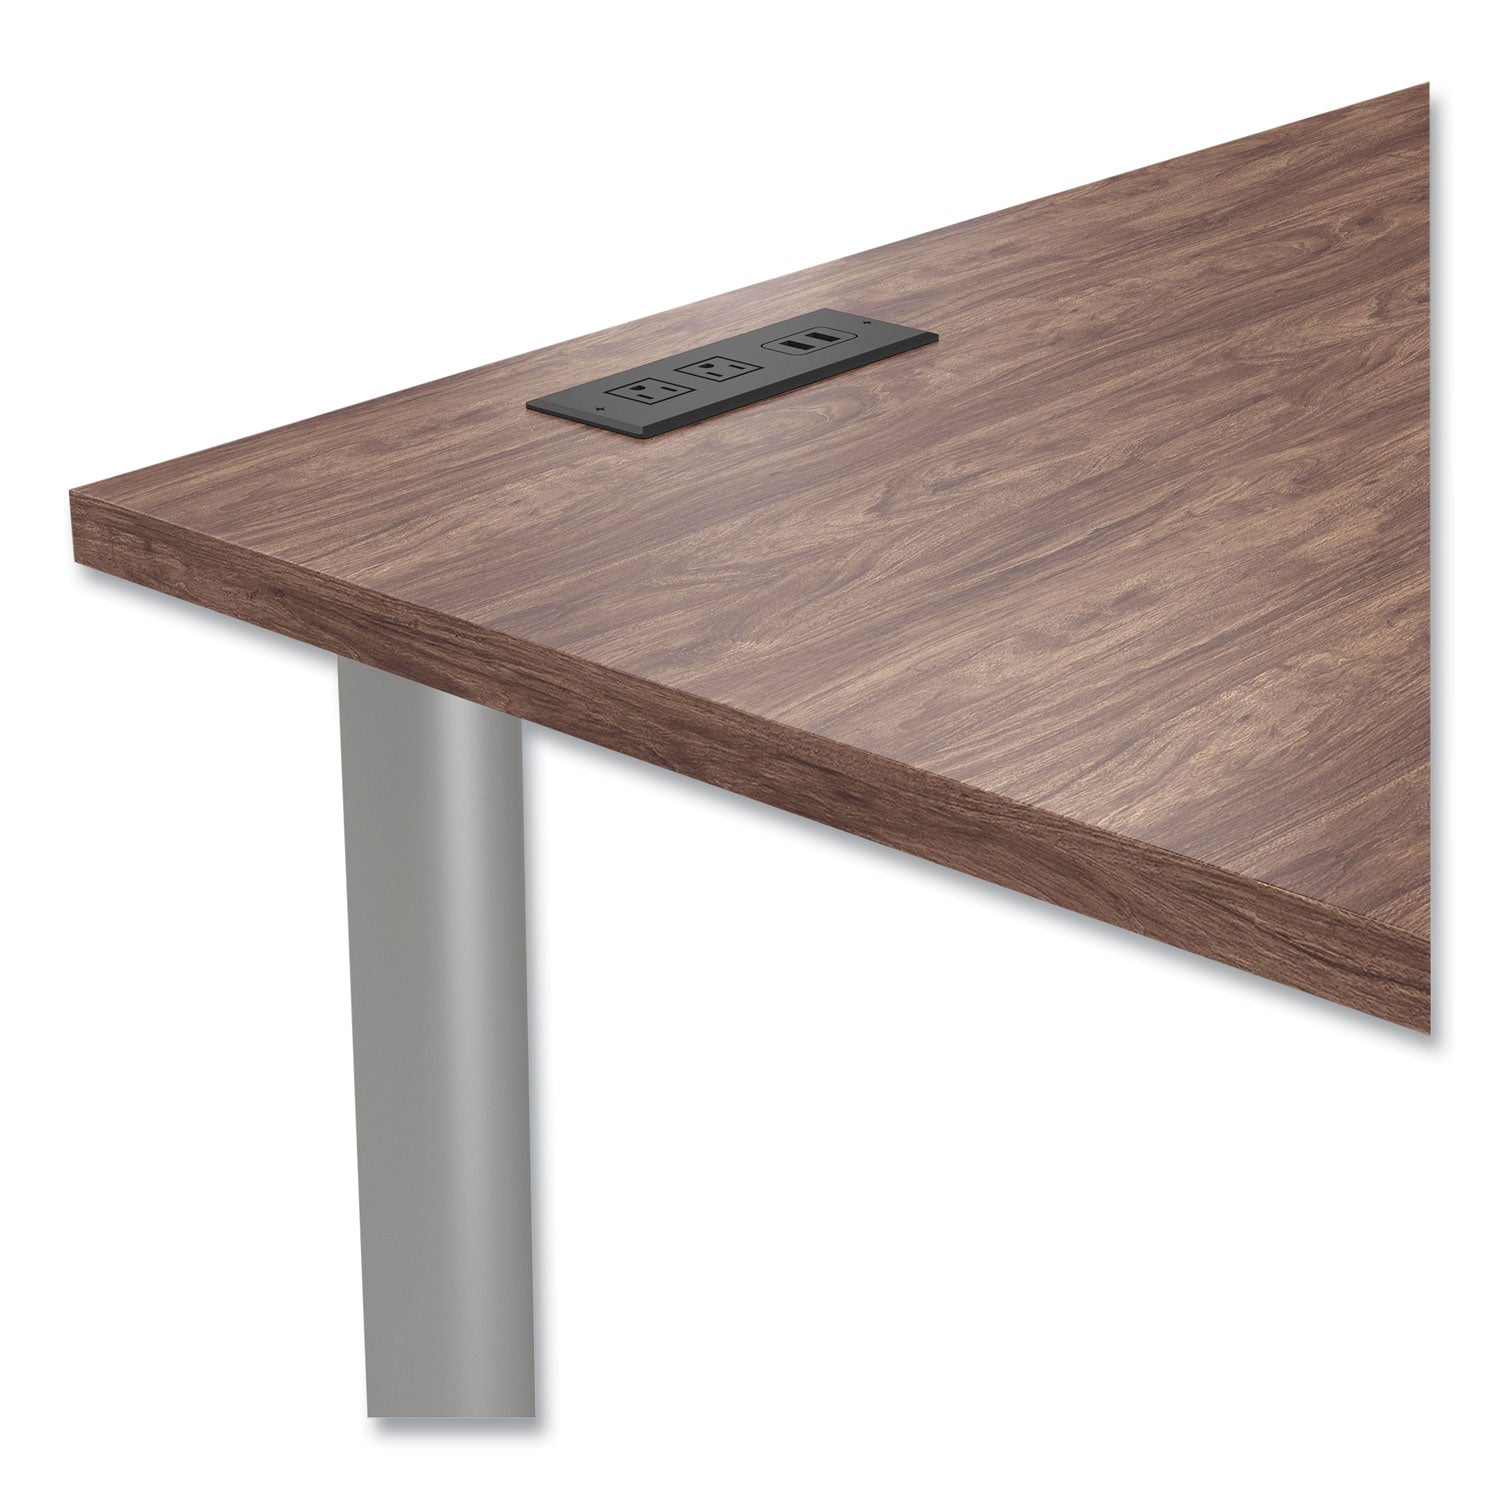 essentials-writing-table-desk-with-integrated-power-management-597-x-293-x-288-espresso-aluminum_uos24398967 - 5